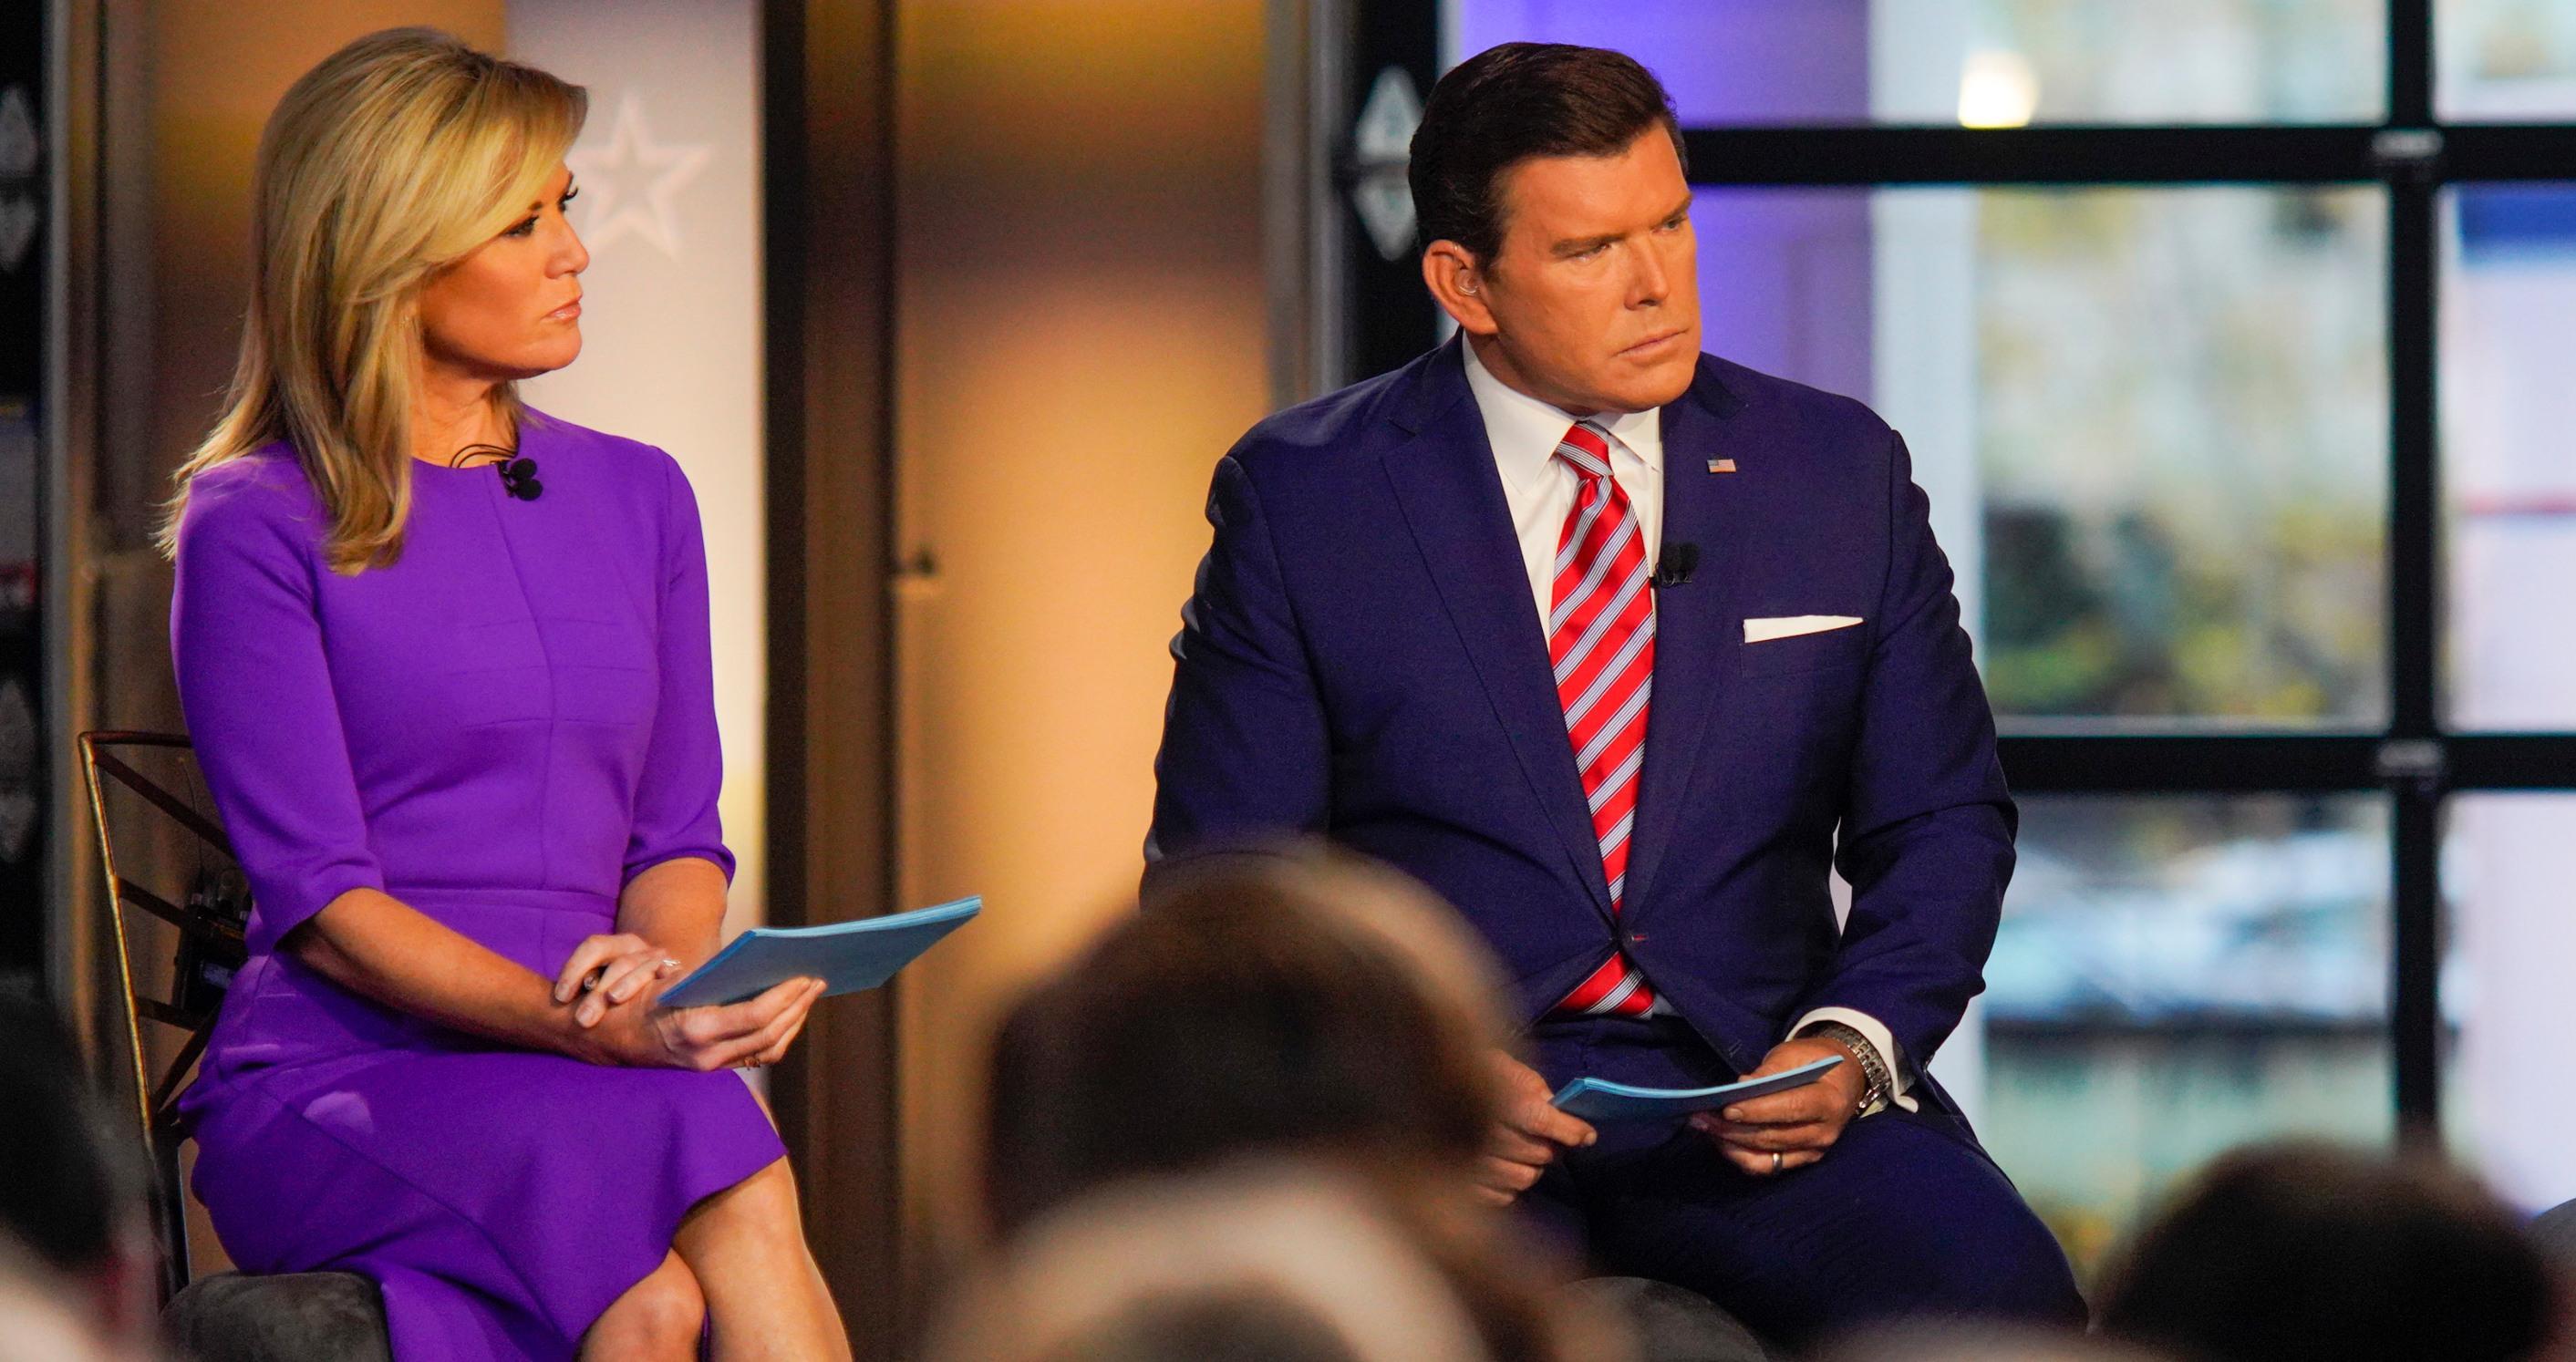 A townhall-style debate hosted by Bret Baier and Martha MacCallum